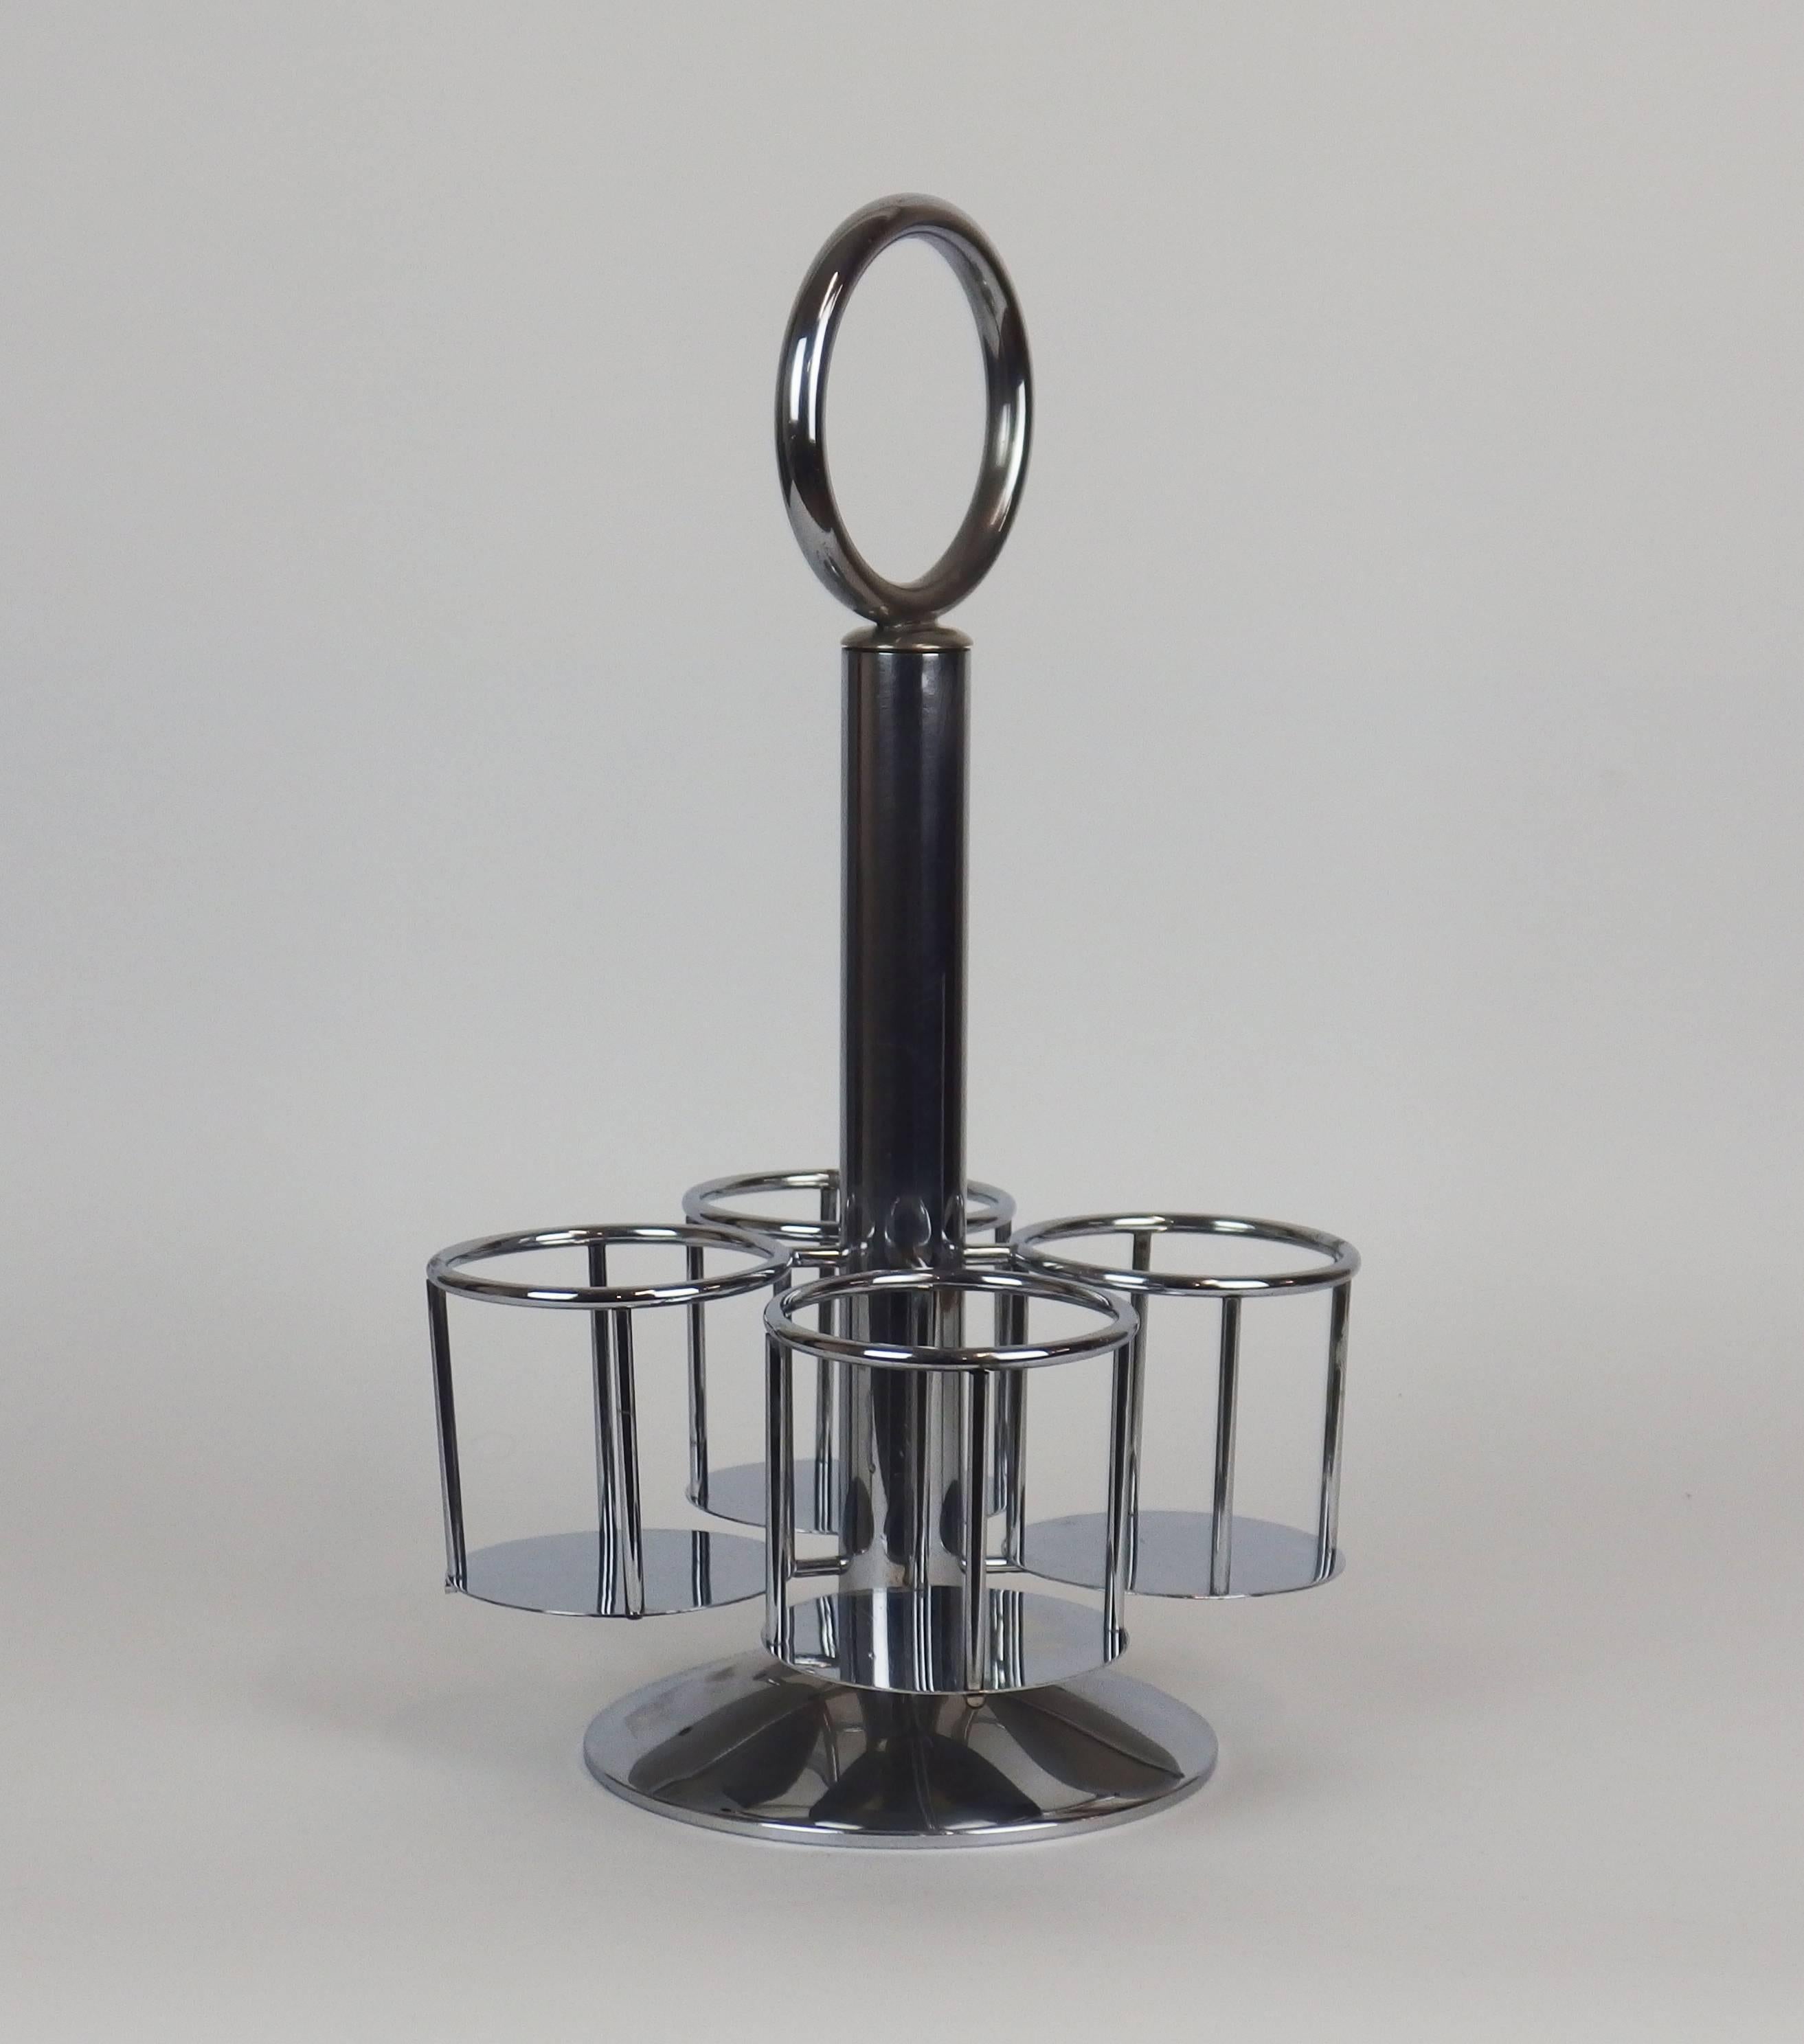 An elegant and decorative modernist chrome-plated metal bottle holder, useful to carry bottles in dining or living room.